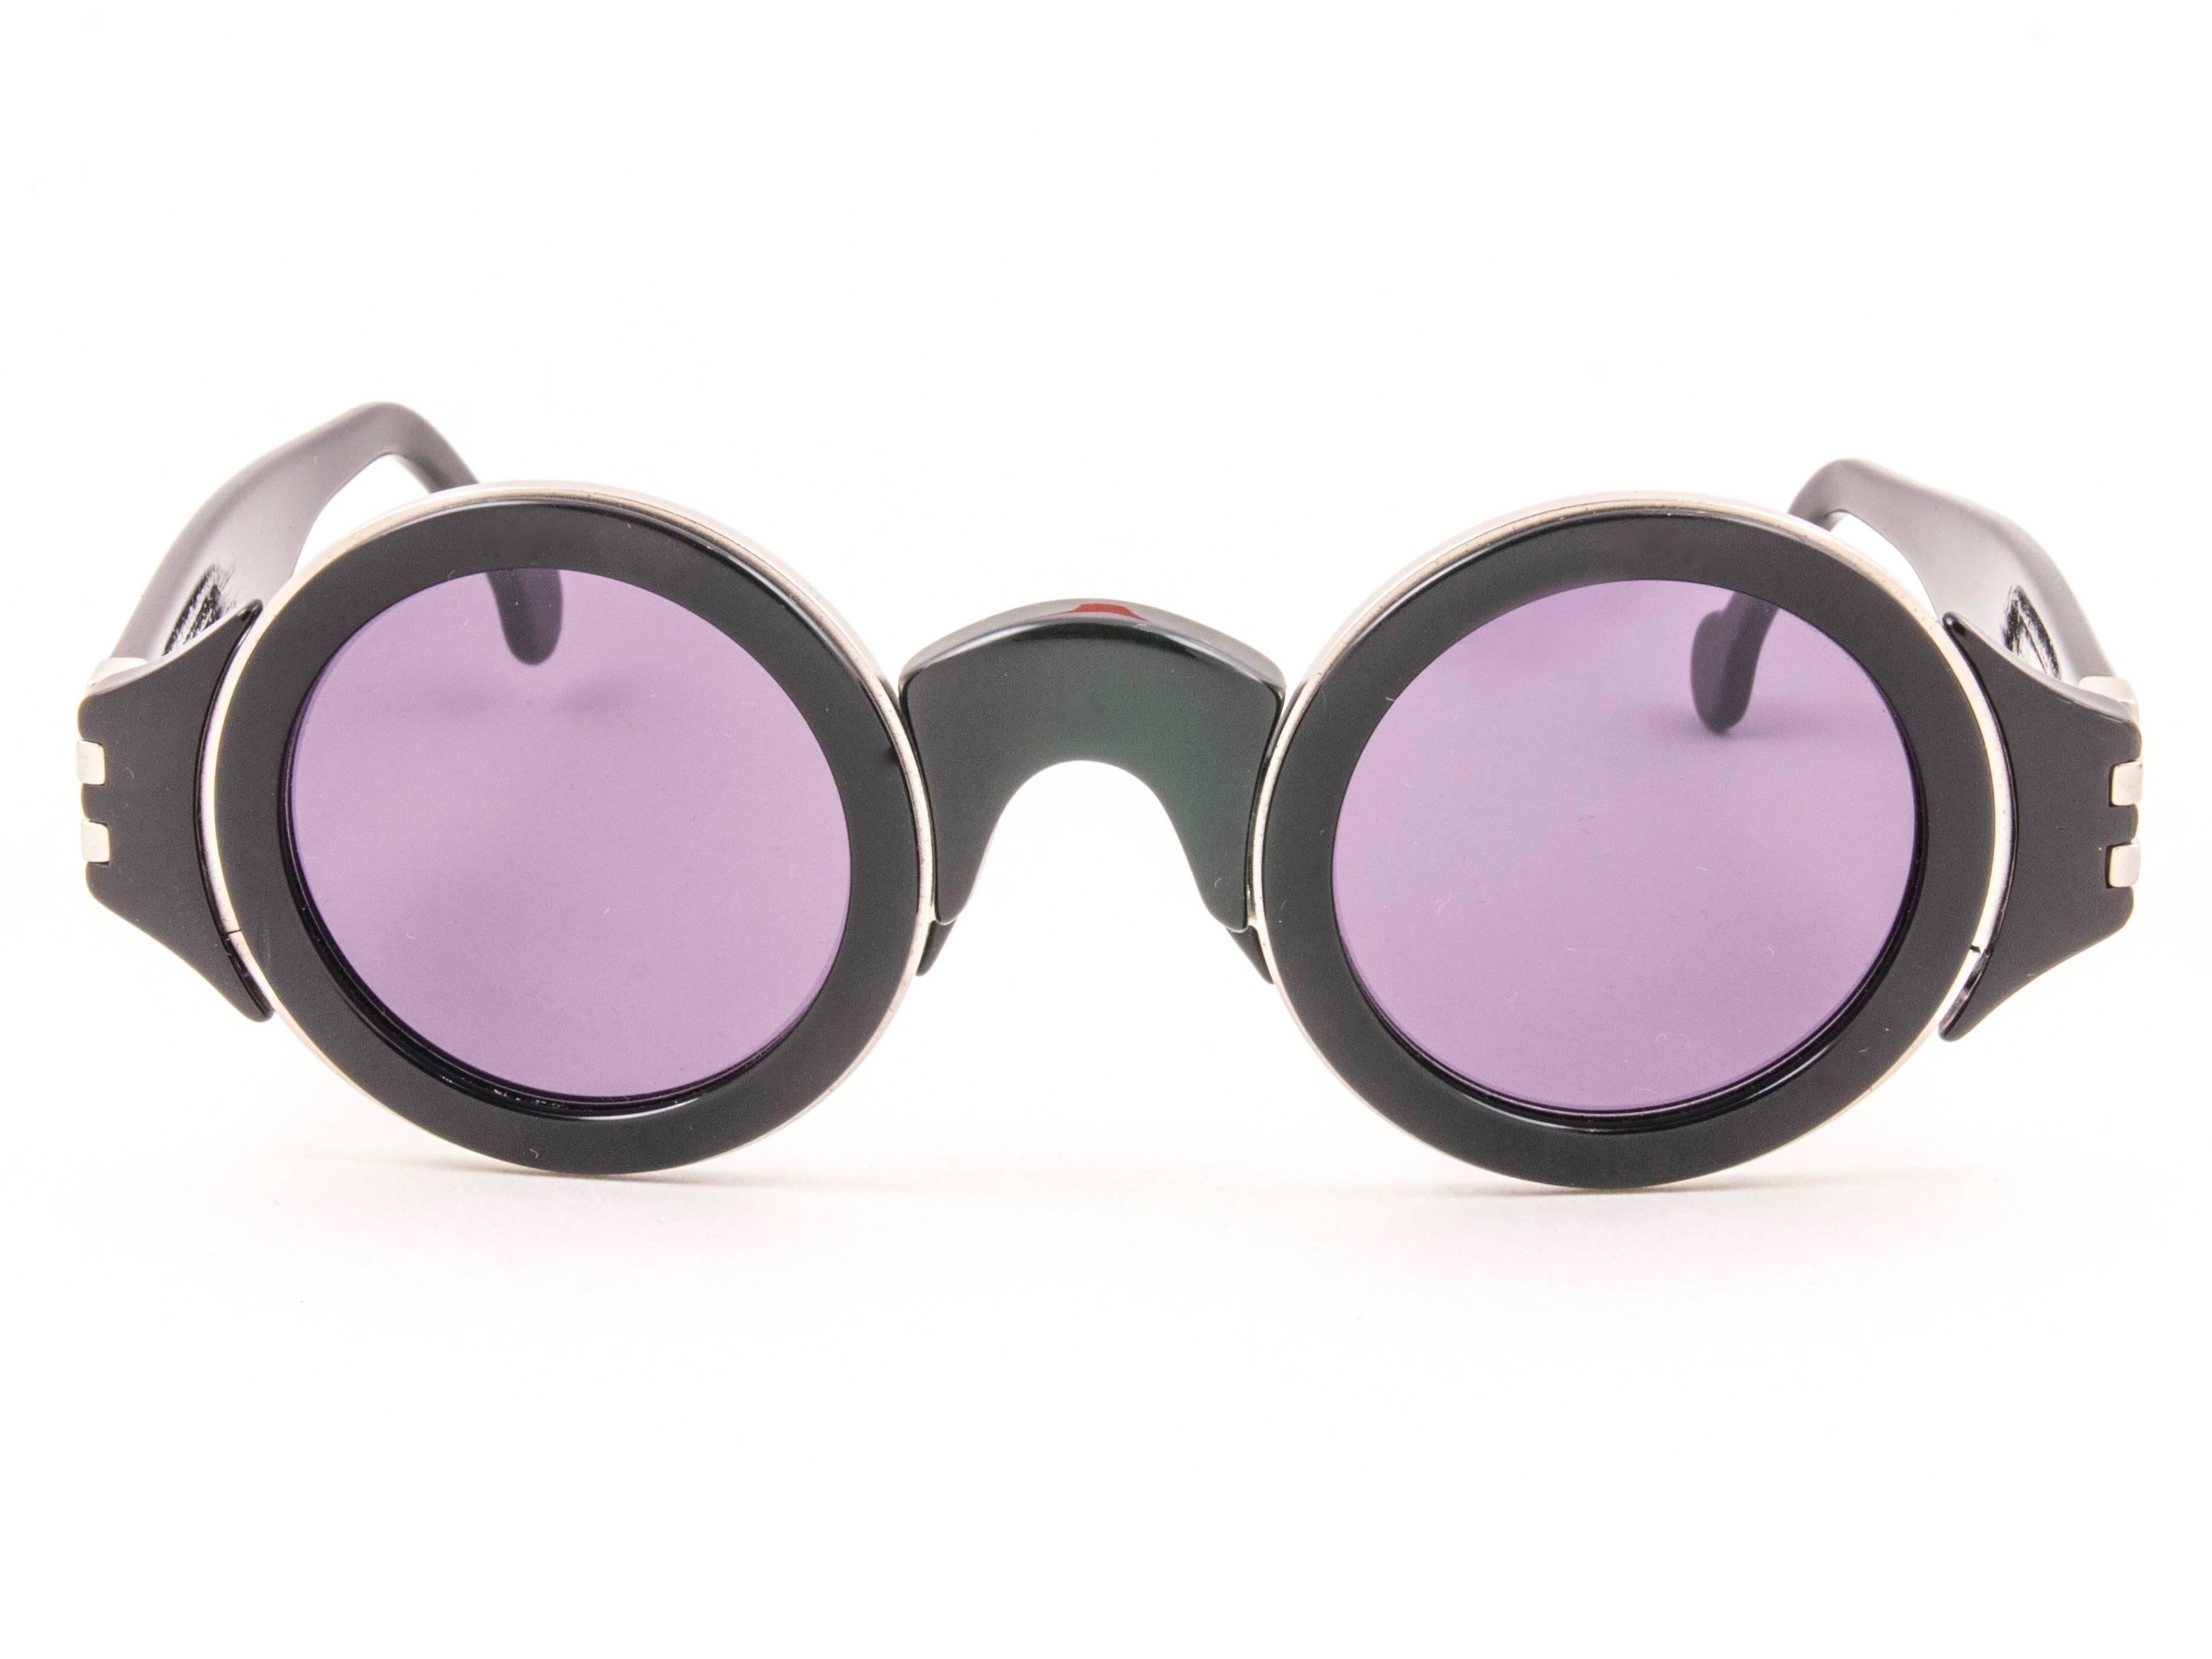 Gray Karl Lagerfeld Vintage Round Black and Silver Sunglasses Made In Germany, 1980s